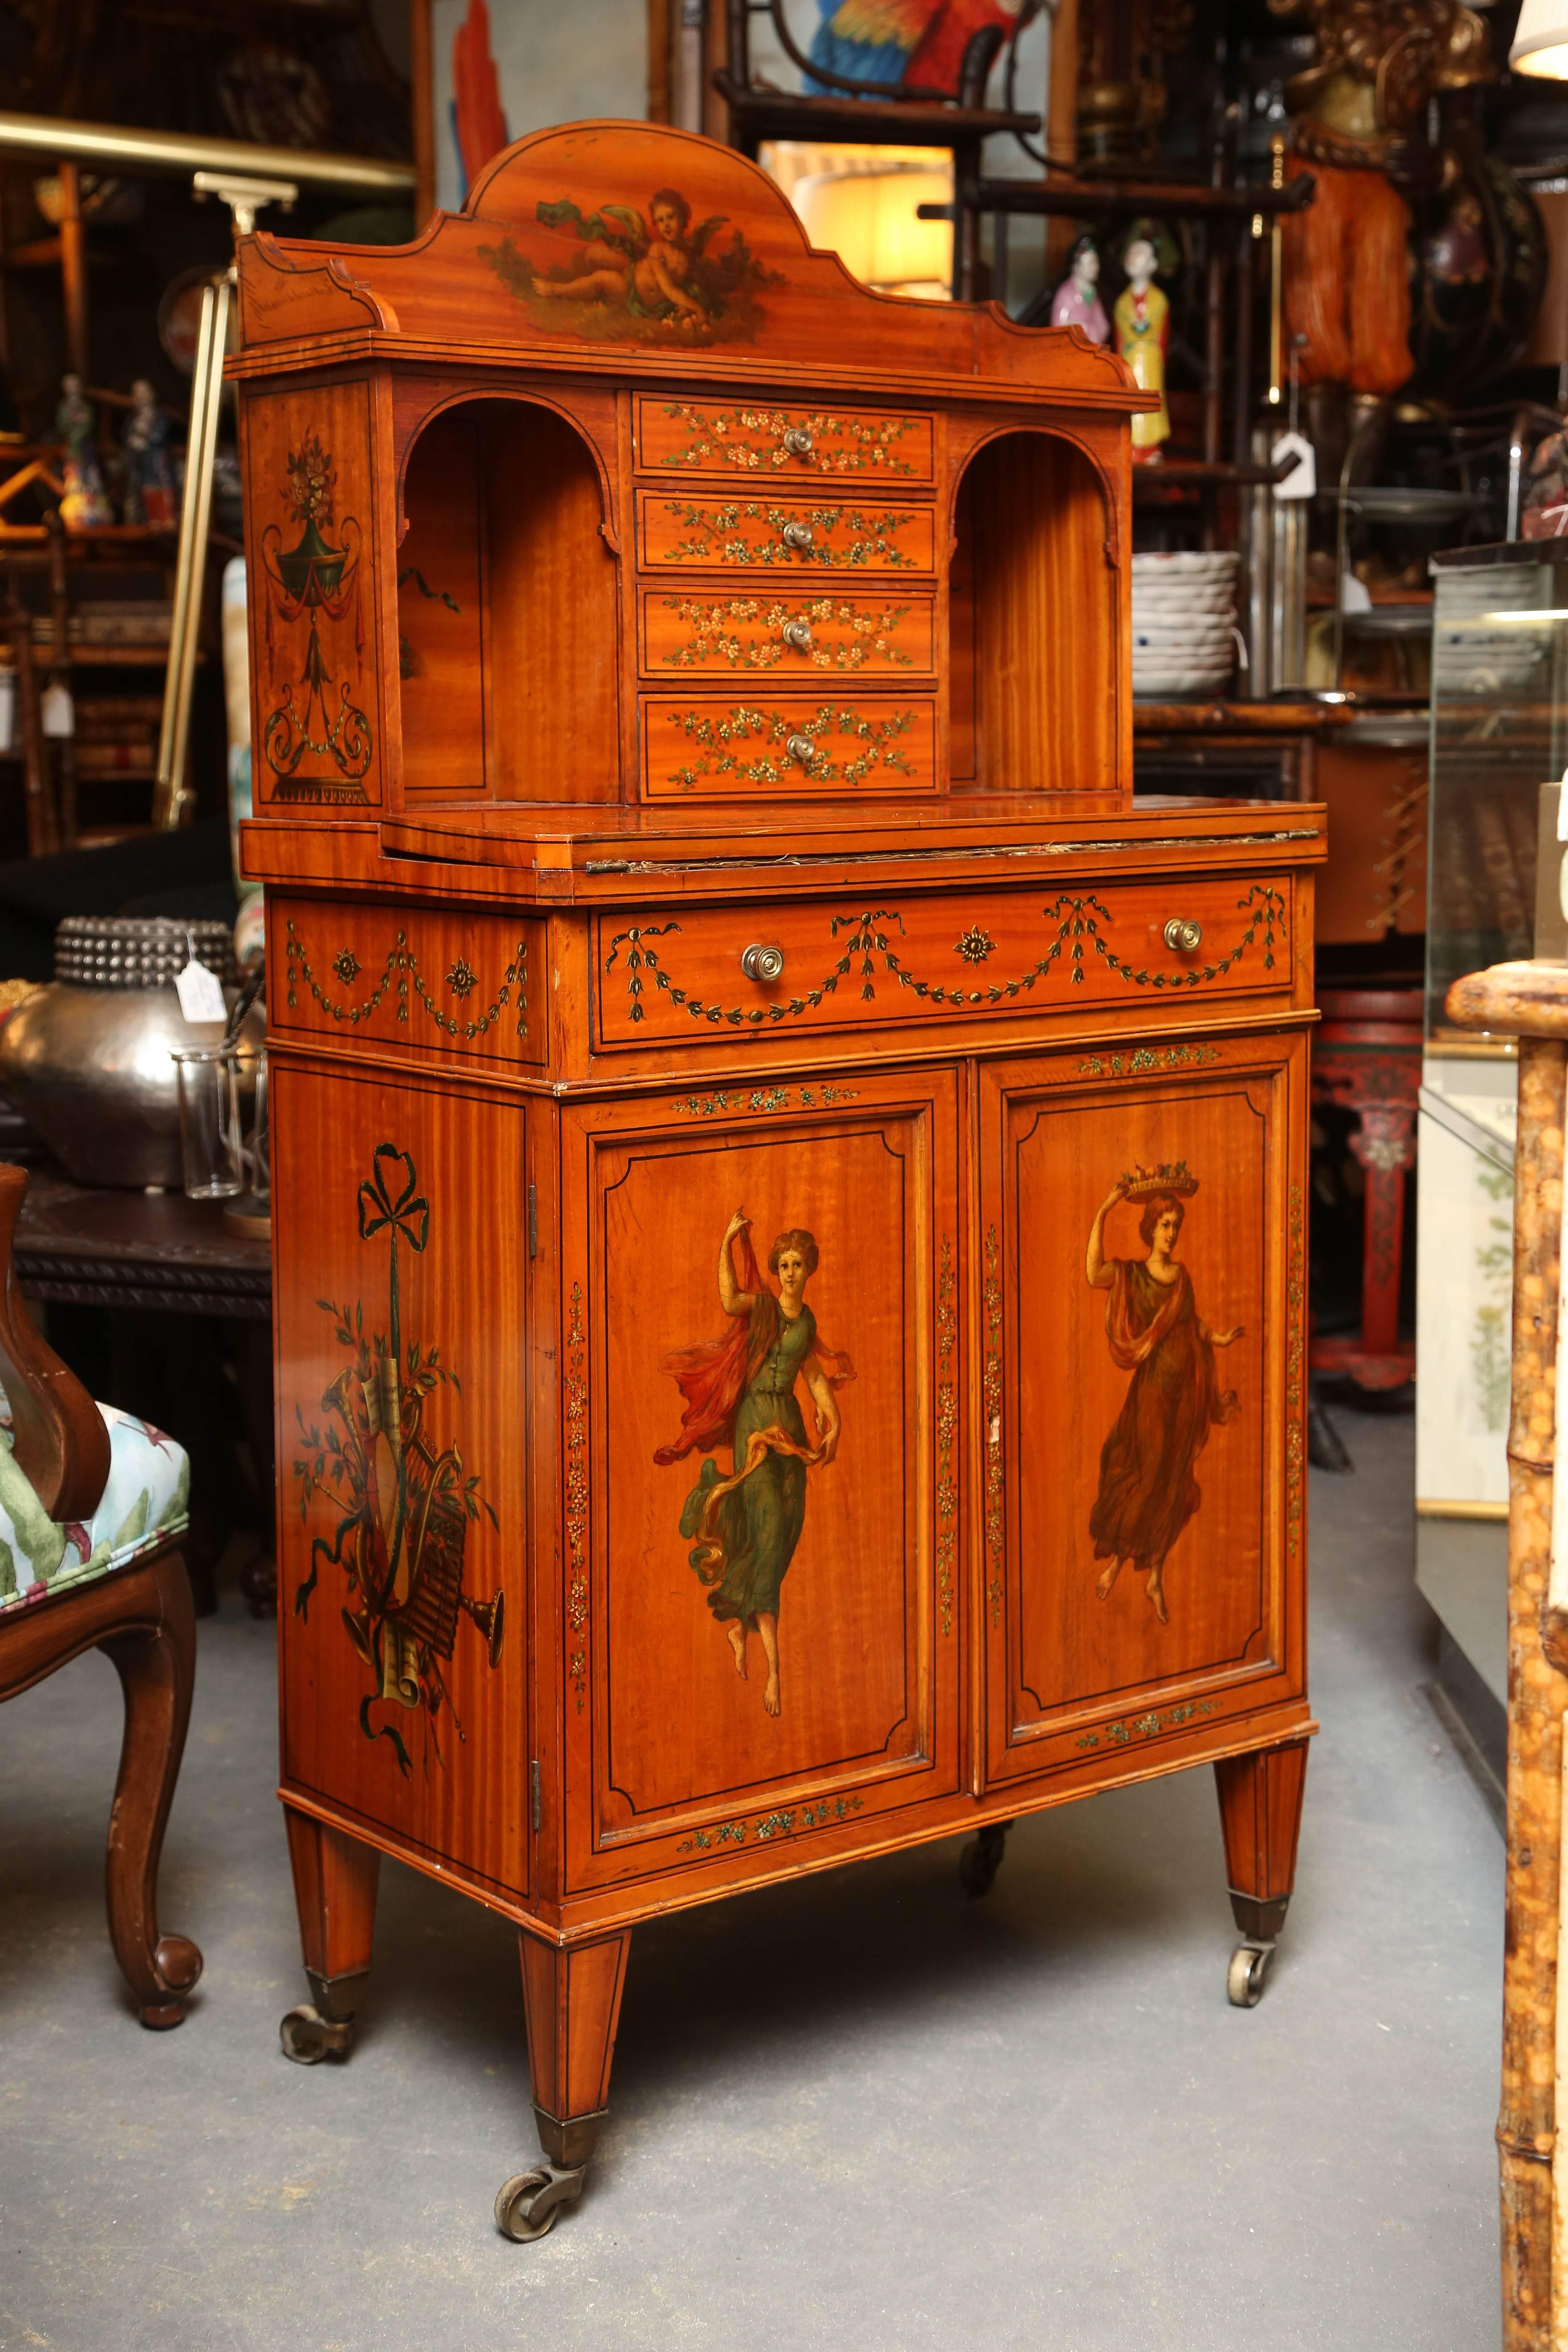 Exquisite detail and exceptionally fine hand paintings adorn this sweet and compact desk.
Fine quality satinwood. A rare example.